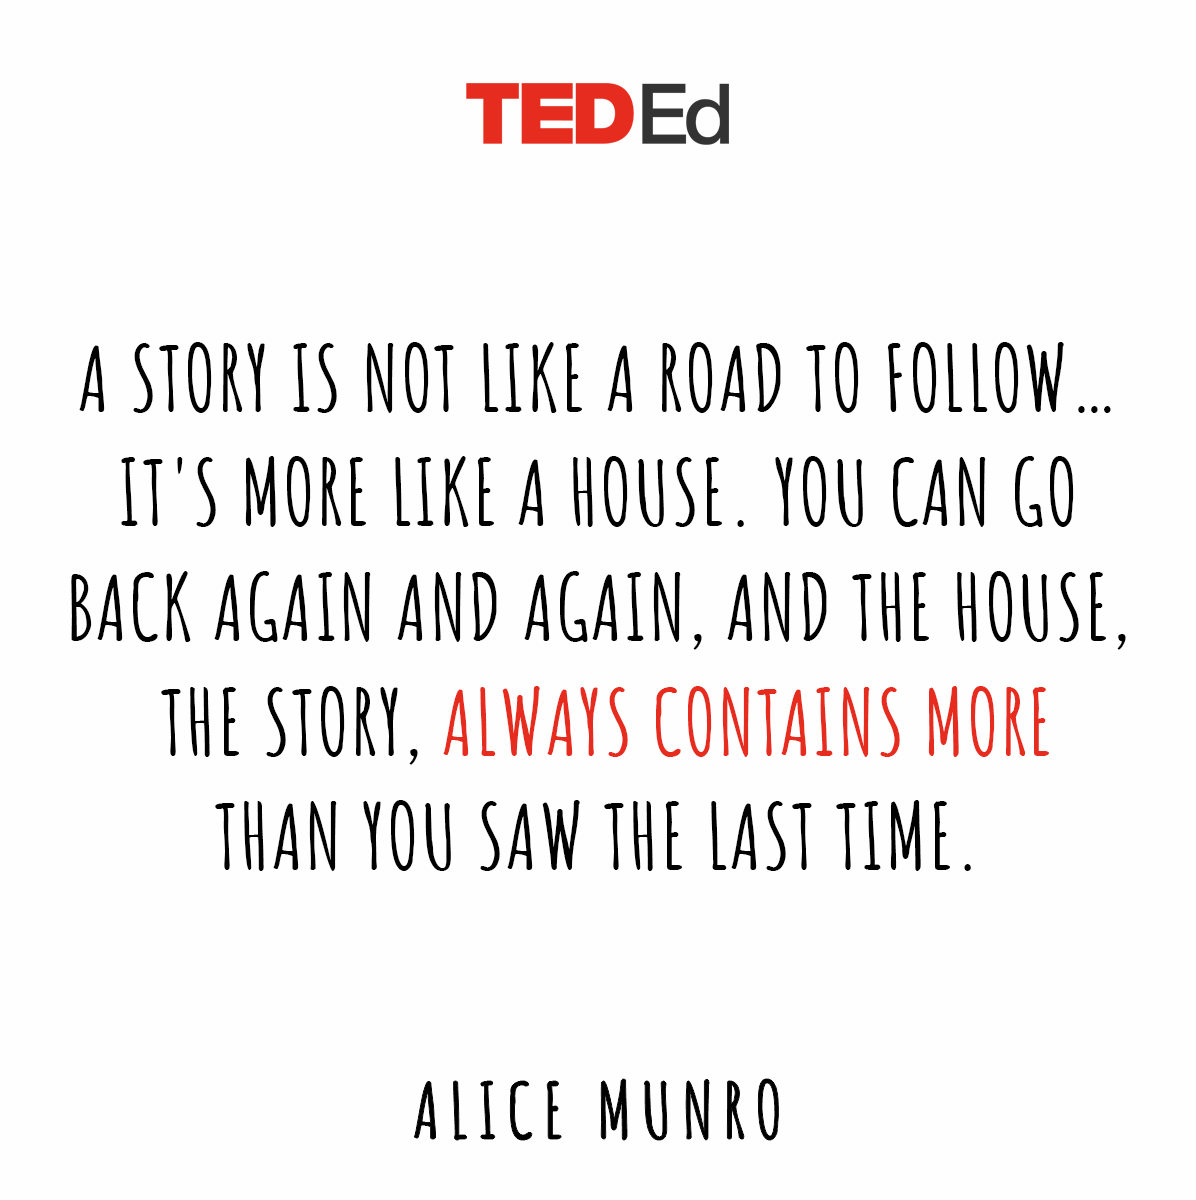 What stories do you keep going back to?